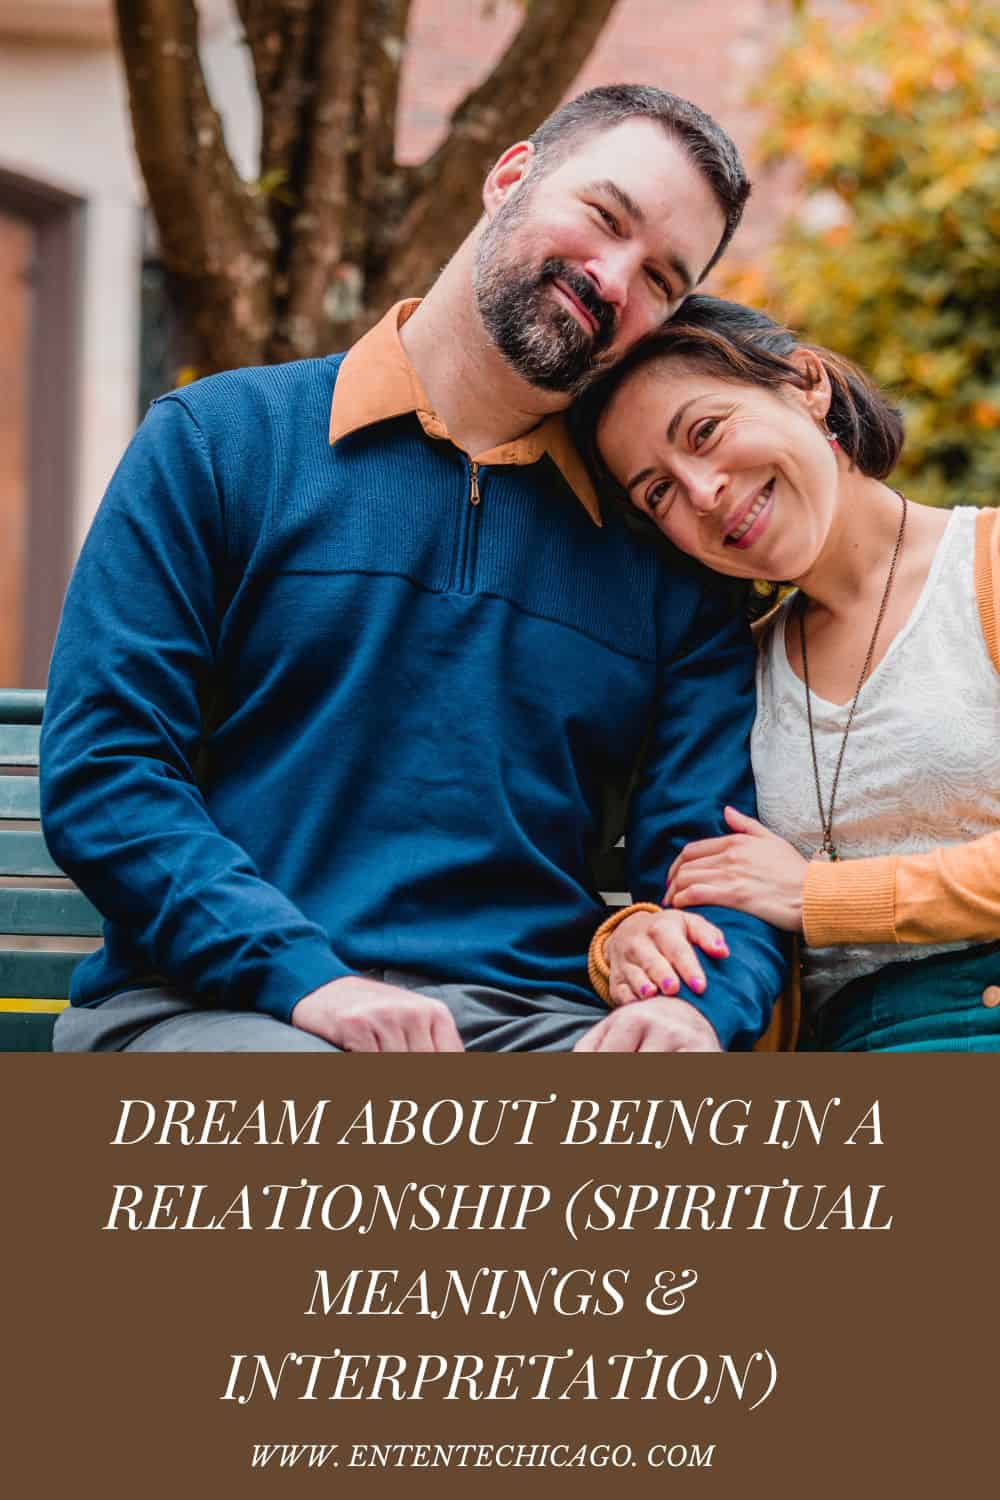 Dream About Being In A Relationship (Spiritual Meanings & Interpretation)